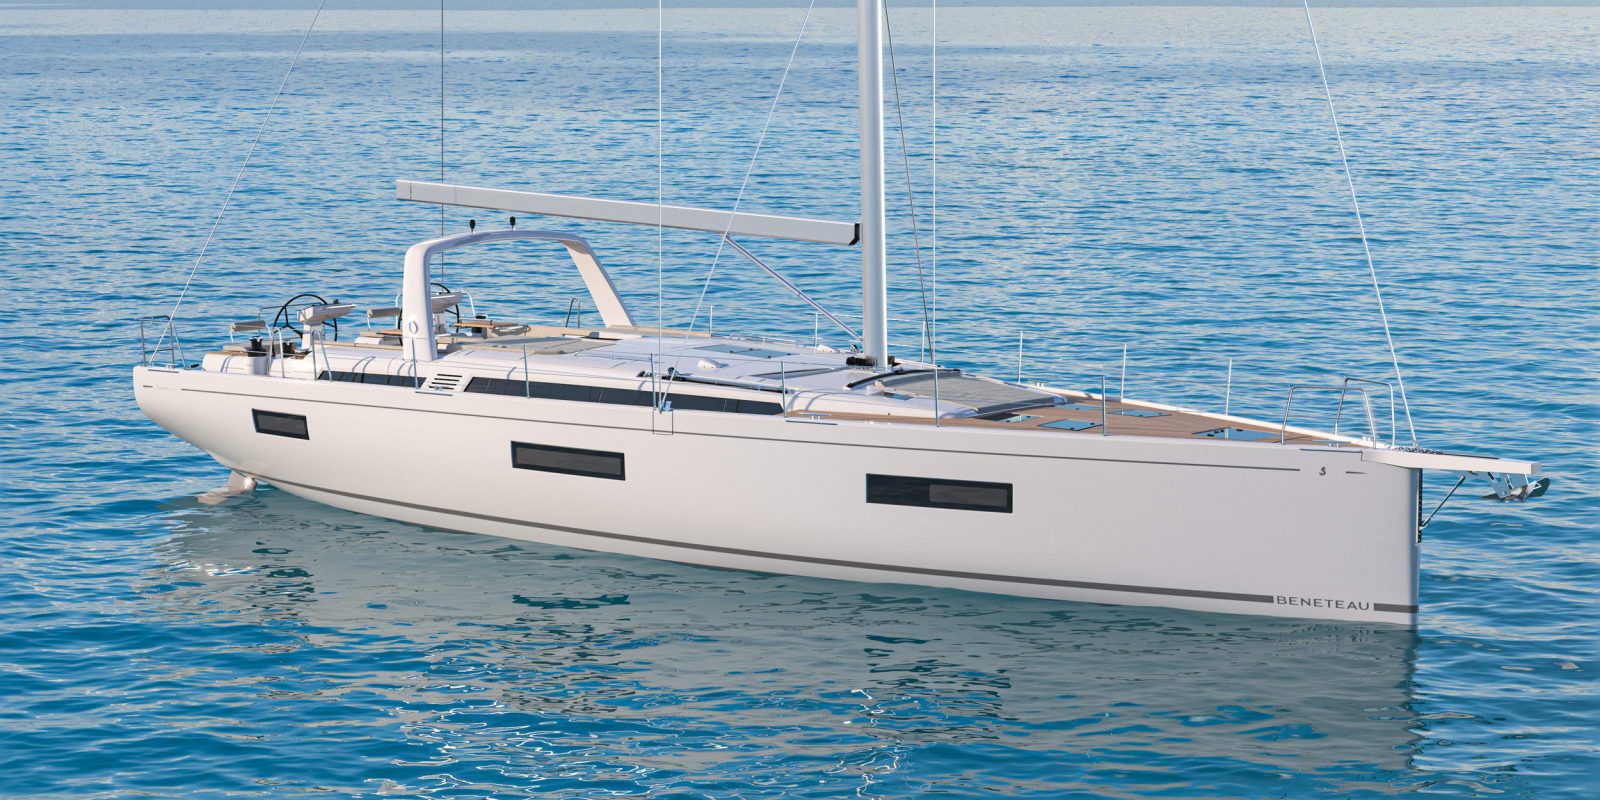 Windy Boats Launches New Flagship